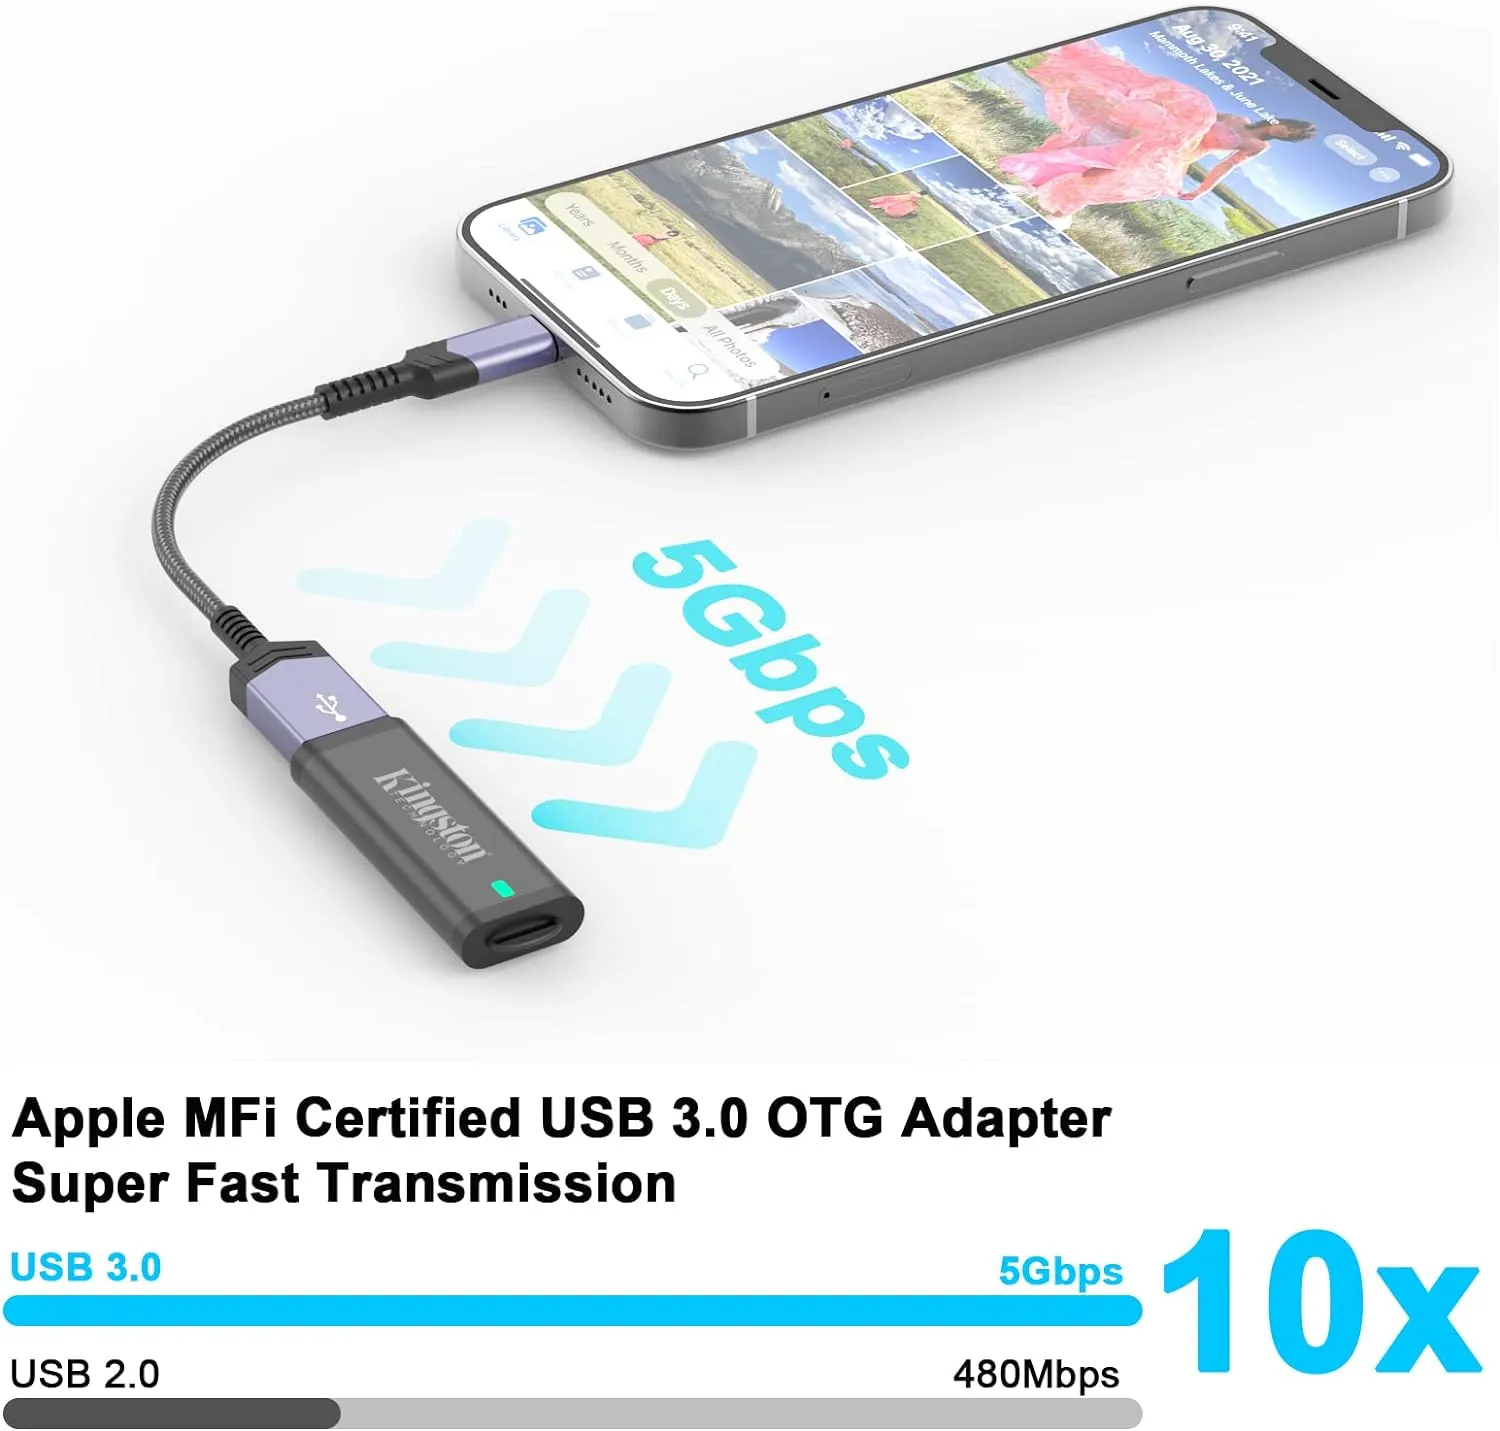 The Female Converter Of OTG Adapter For Lightning To USB Camera Supports  USB Flash Drive, Gamepad, Hub, Mouse, Keyboard, USB Flash Drive And MIDI Compatible  IPad IOS. From Sansan912, $3.52